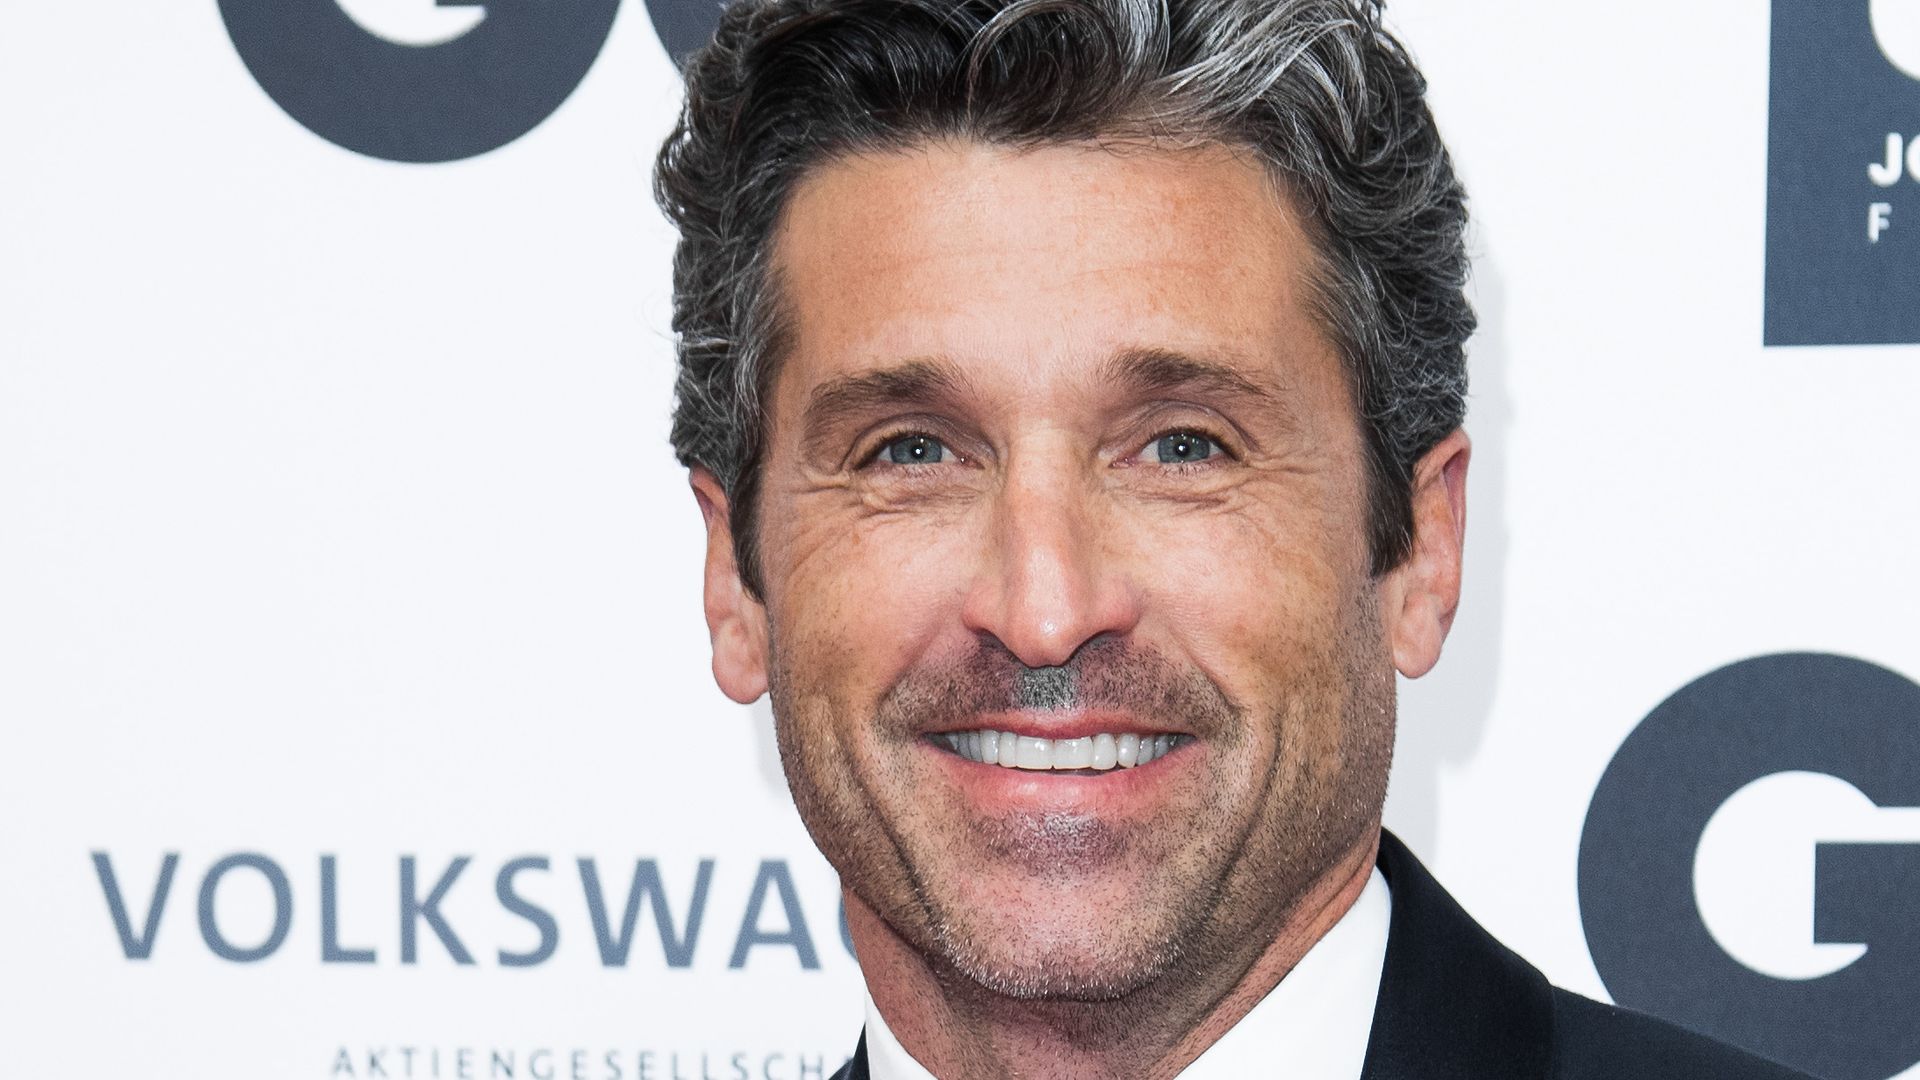 Patrick Dempsey looks unrecognizable in shocking throwback photo you don't want to miss